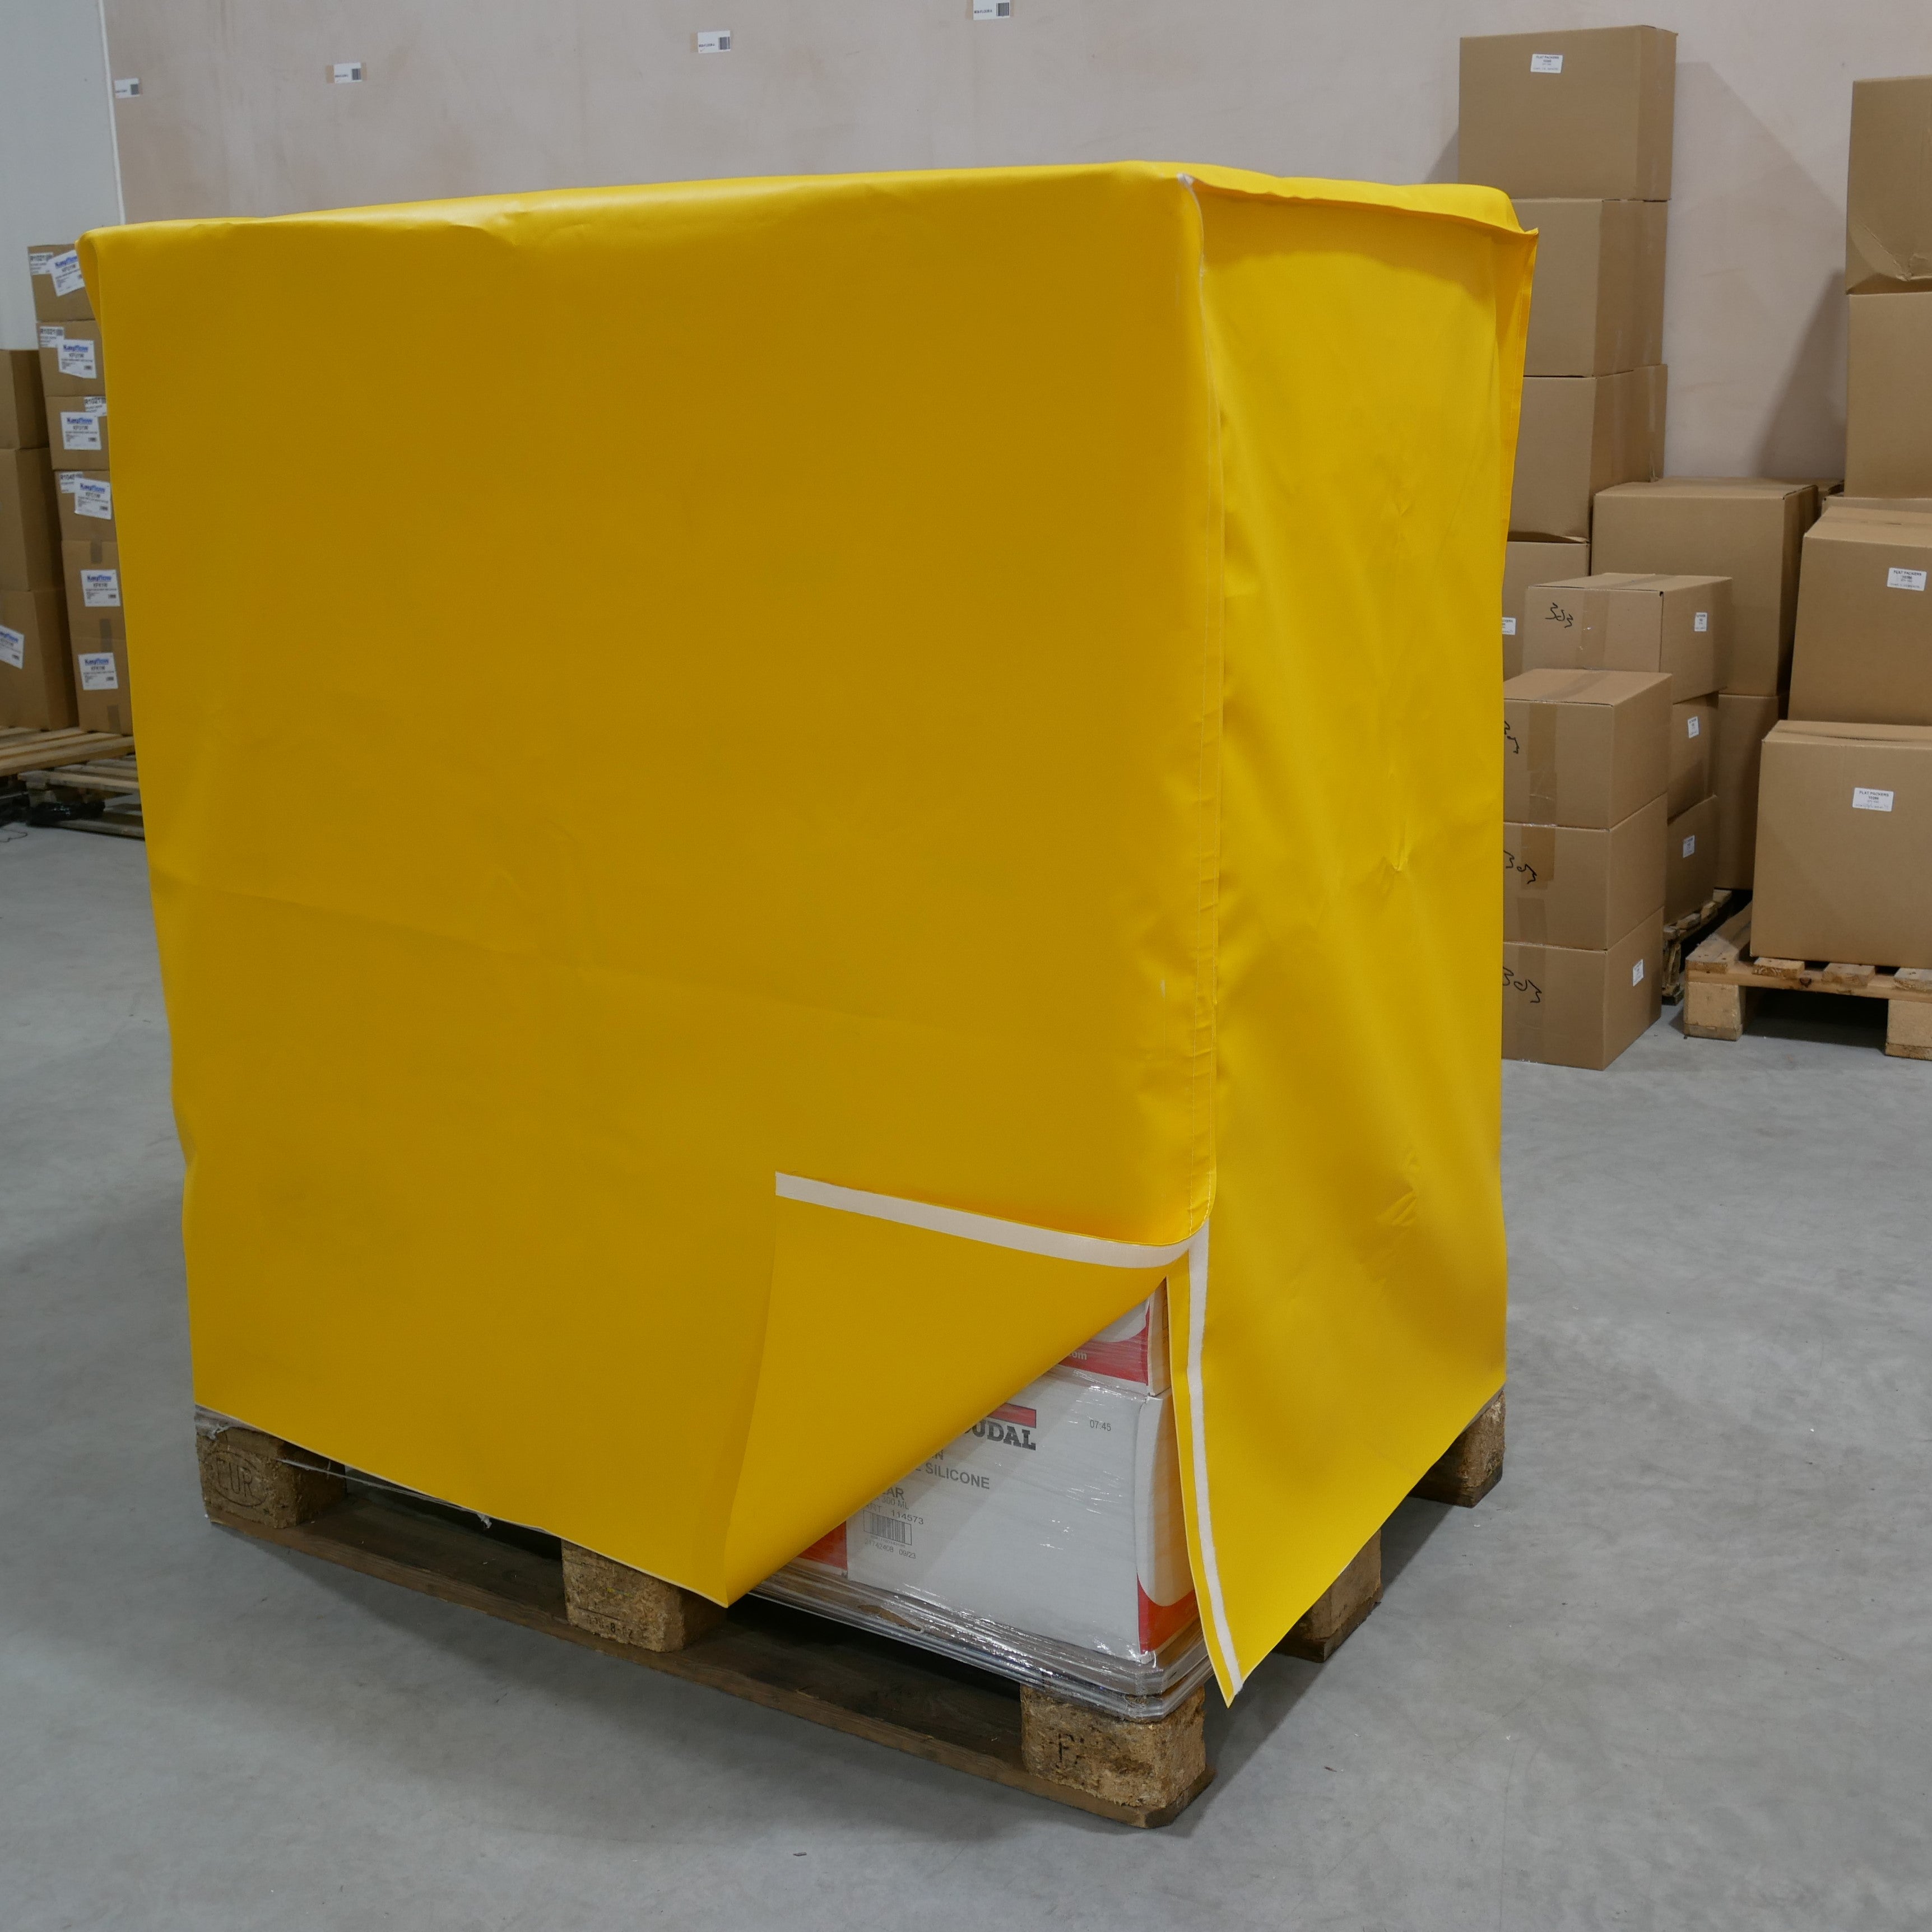 Palband Pallet Covers - Heavy Duty PVC Material To Suit UK Pallets